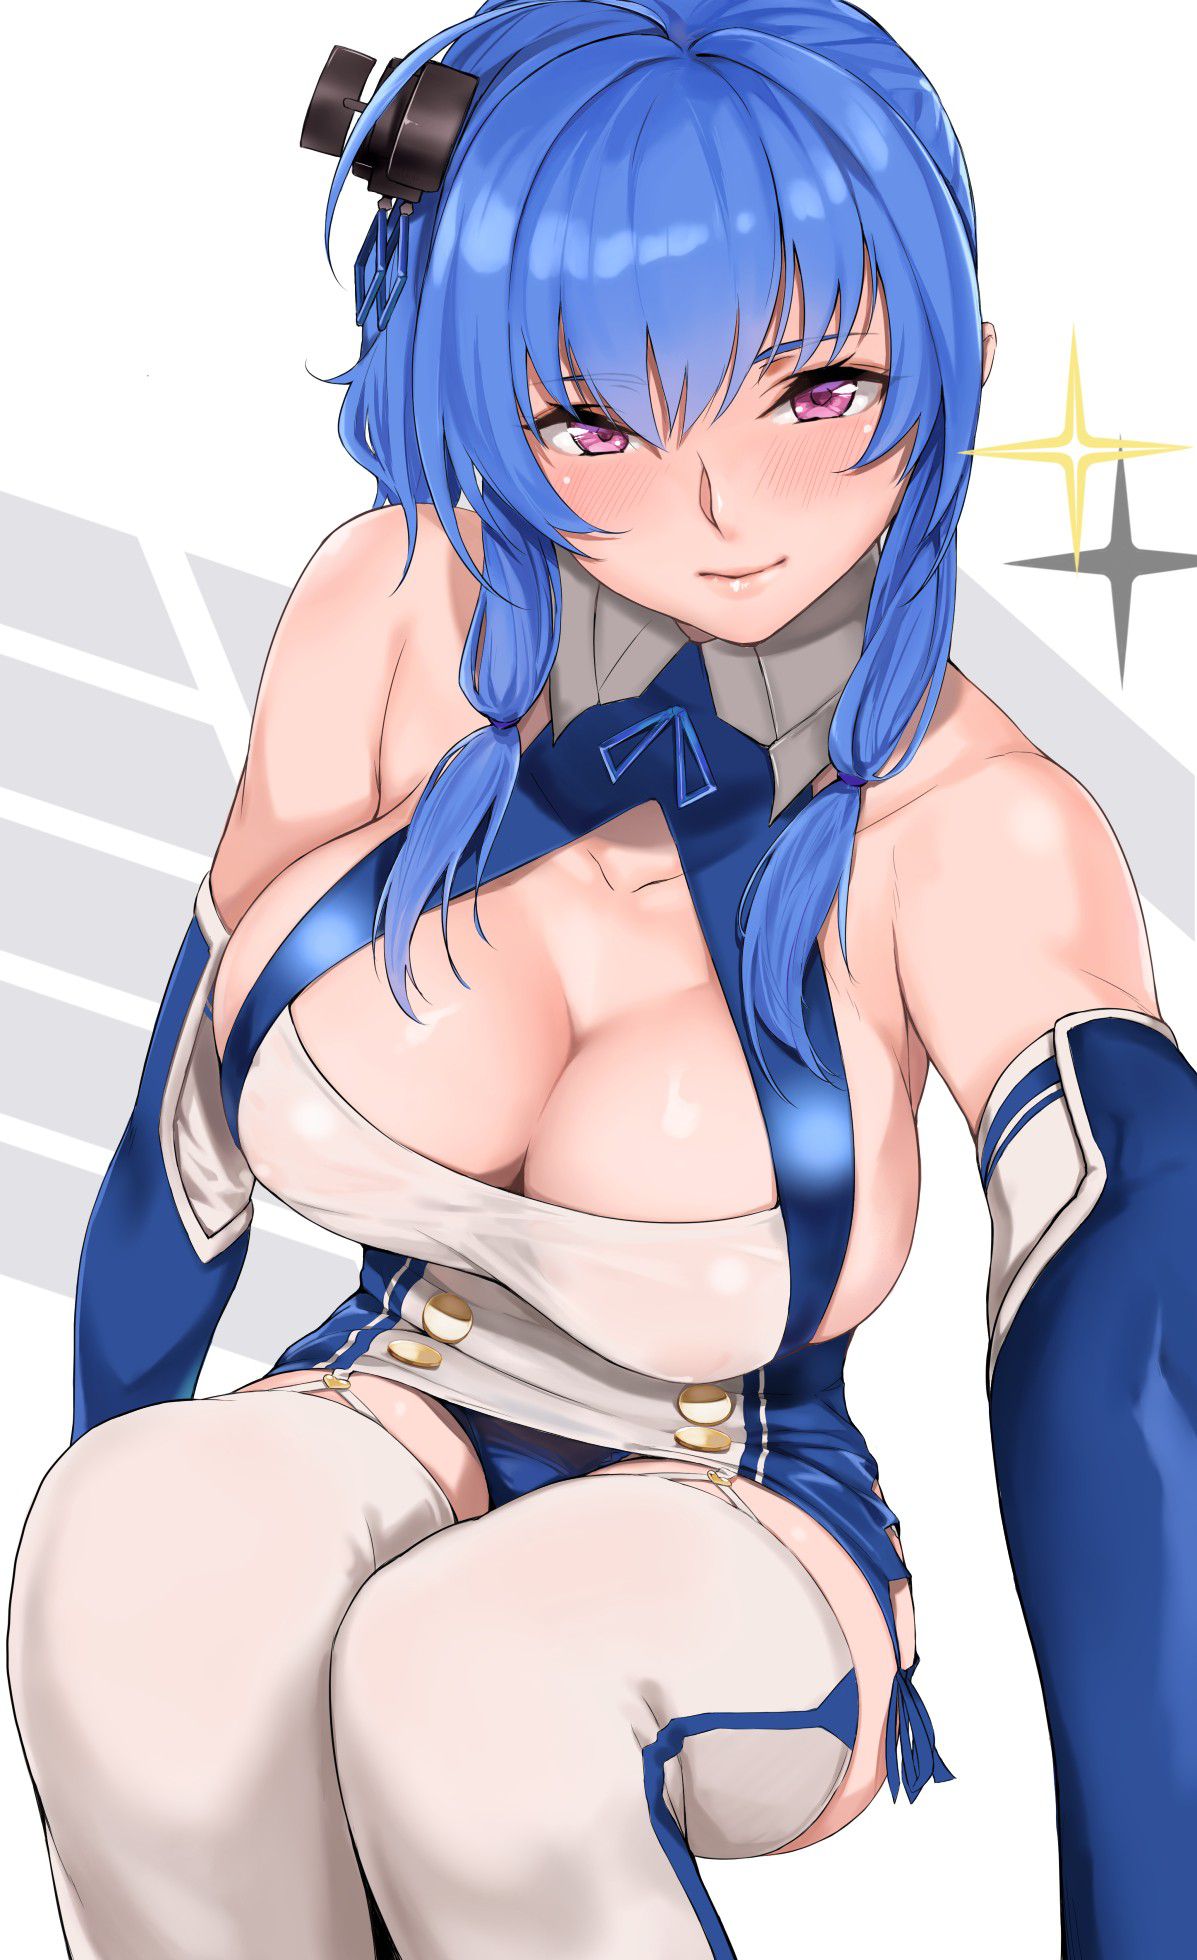 Two-dimensional erotic image of St. Louis of Azur Lane who wants to call it St. Louis unintentionally 1